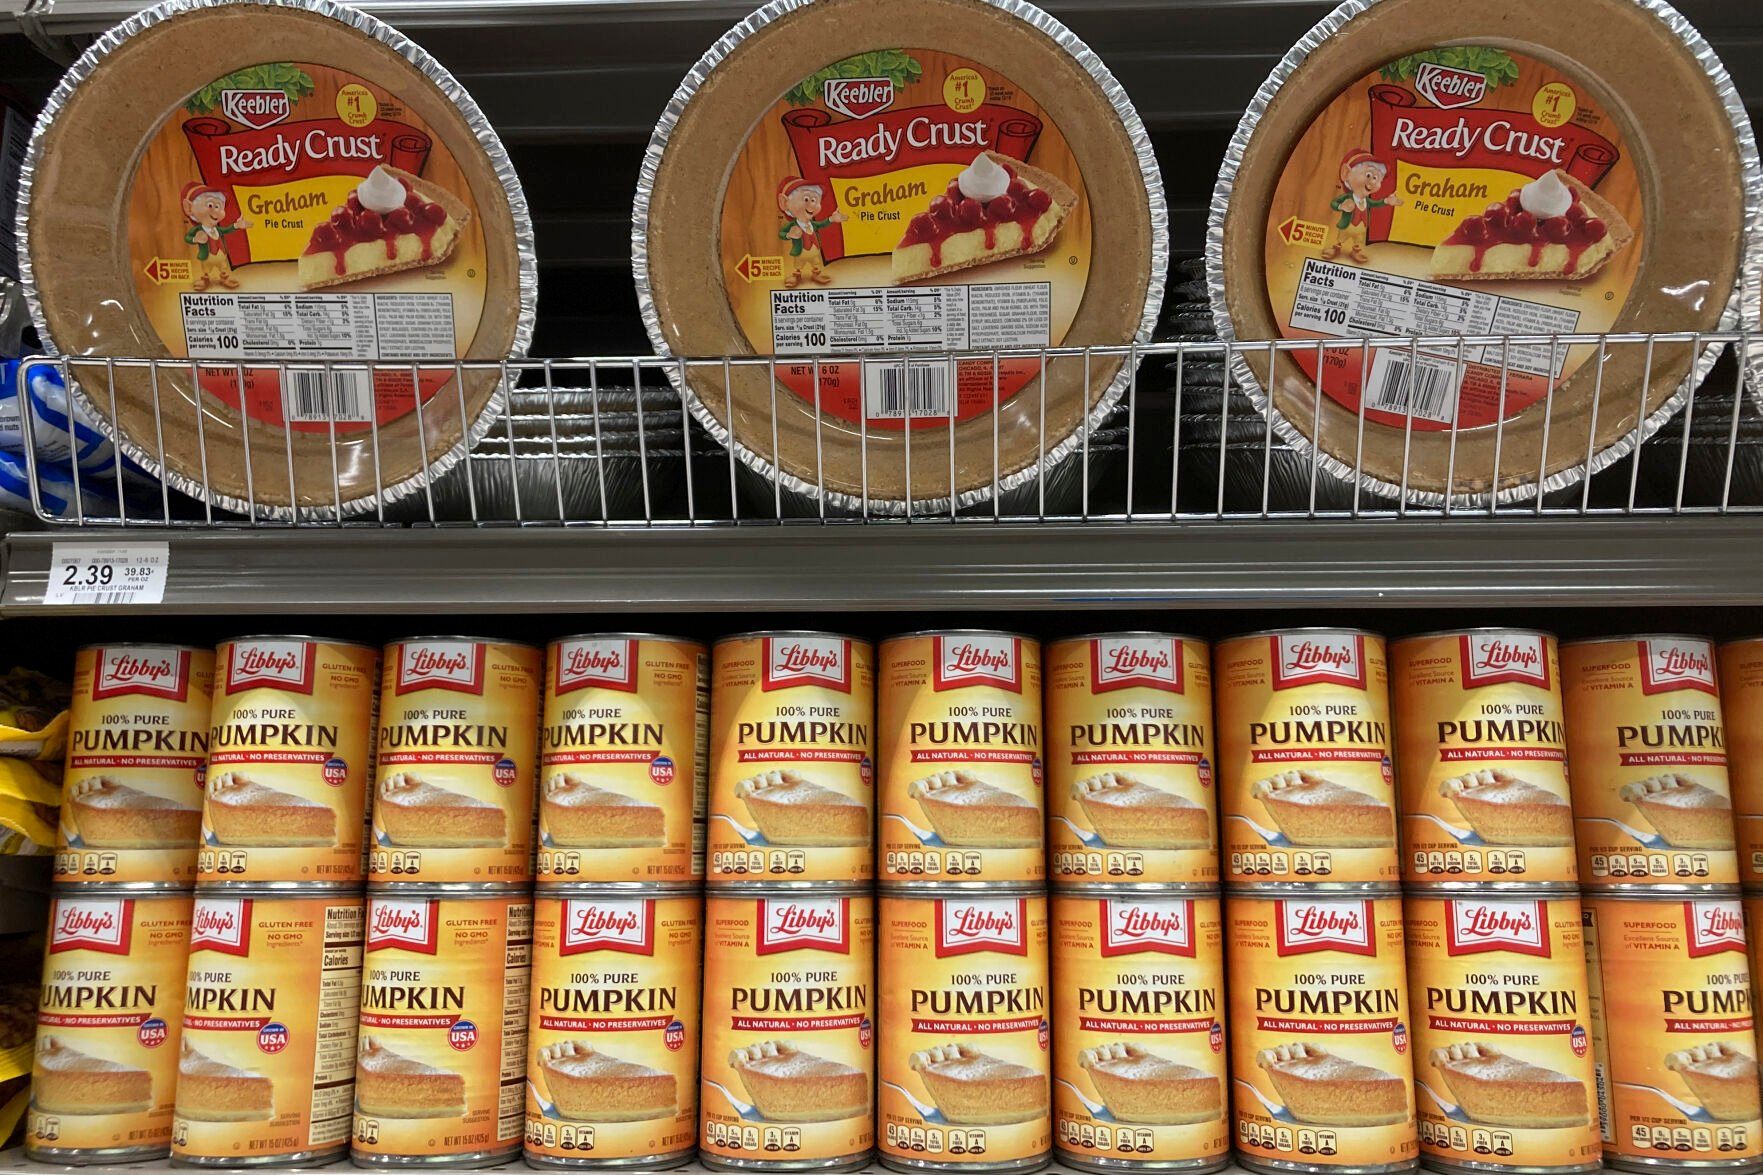 <p>File - Canned pumpkin and graham cracker shell crusts are displayed at a Publix Supermarket, Tuesday, Nov. 16, 2021 in North Miami, Fla. Americans are bracing for a costly Thanksgiving this year, with double-digit percent increases in the price of turkey, potatoes, stuffing, canned pumpkin and other staples. (AP Photo/Marta Lavandier, File)</p>   PHOTO CREDIT: Marta Lavandier 